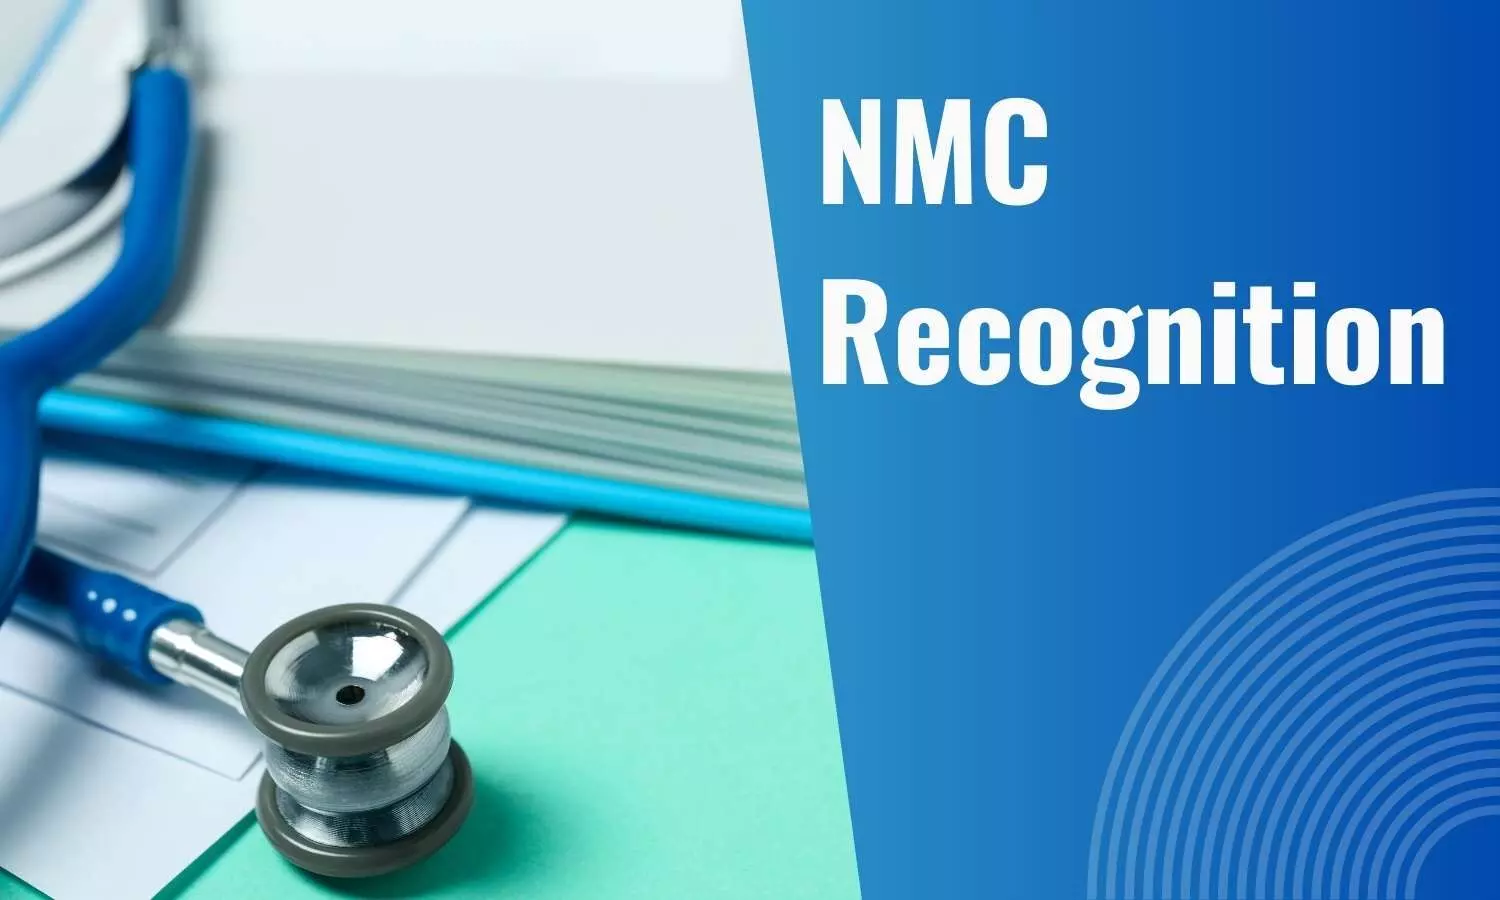 Medical Colleges can ensure compliance before admissions deadline, move NMC against Derecognition: NMC Member